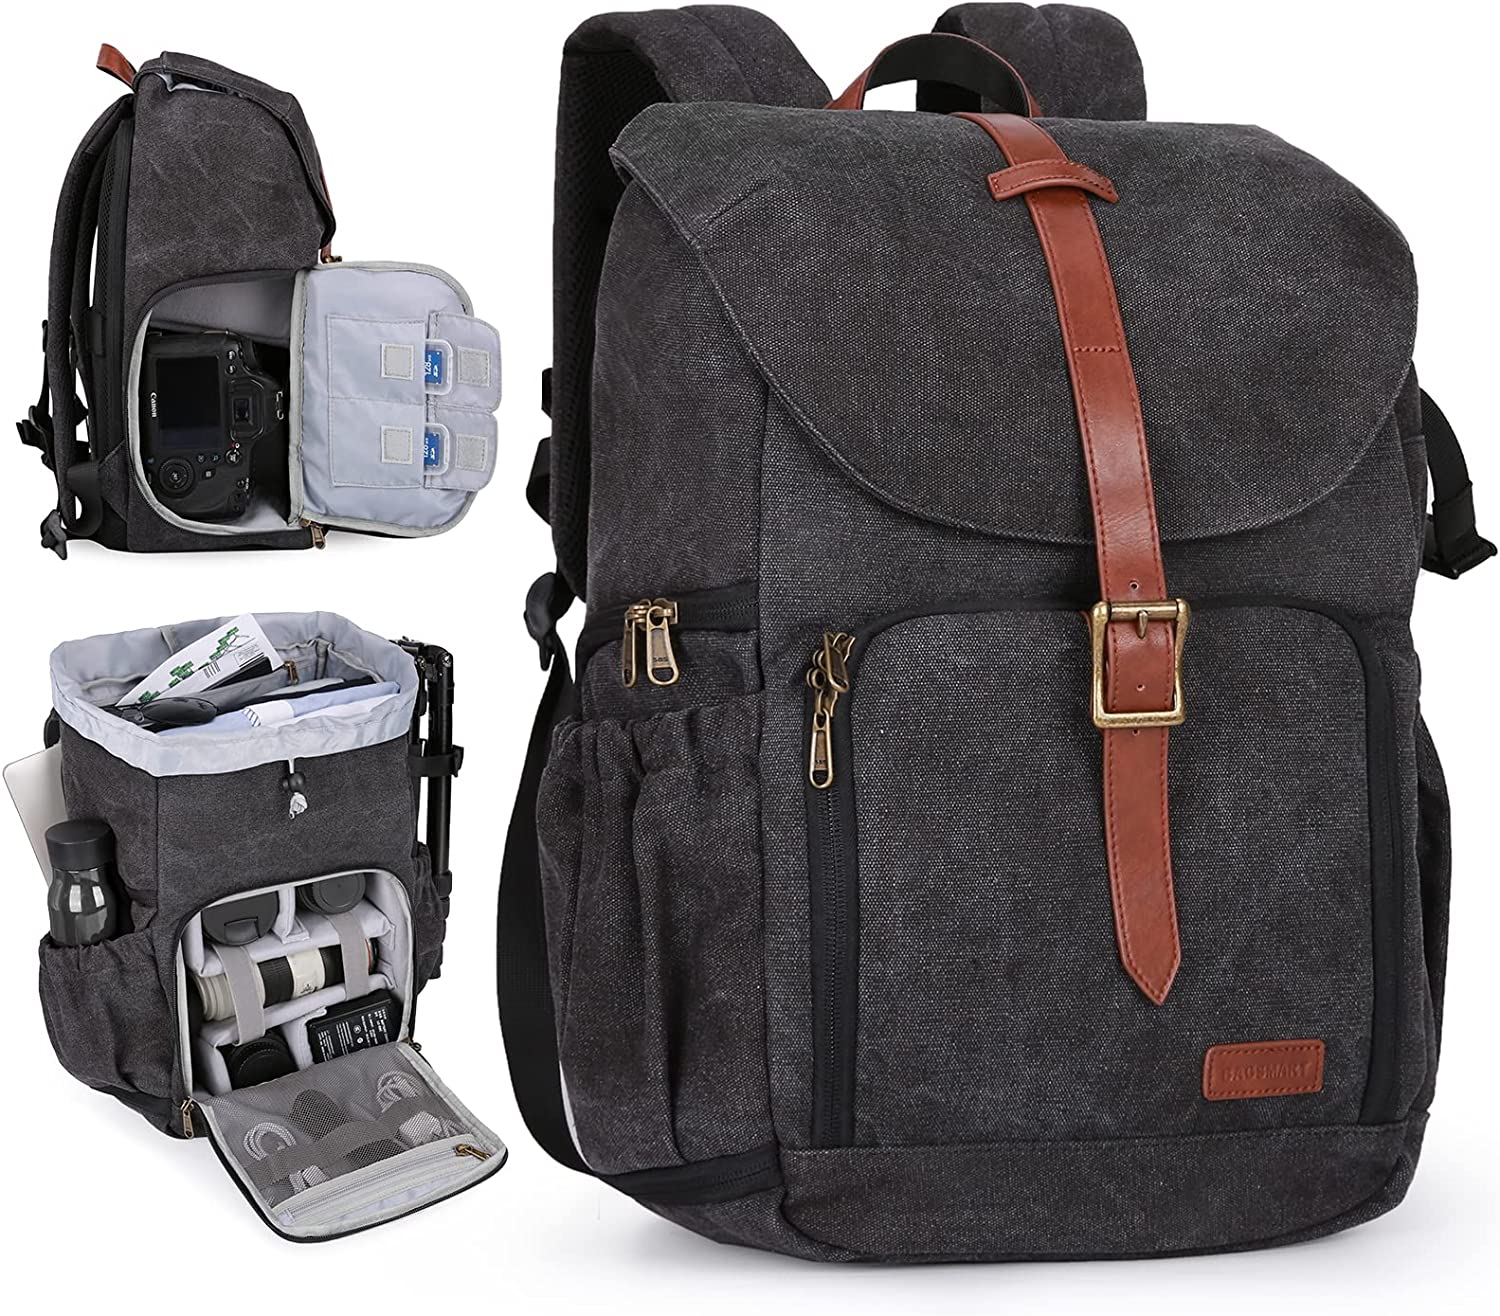 camera and laptop backpack comparison tables